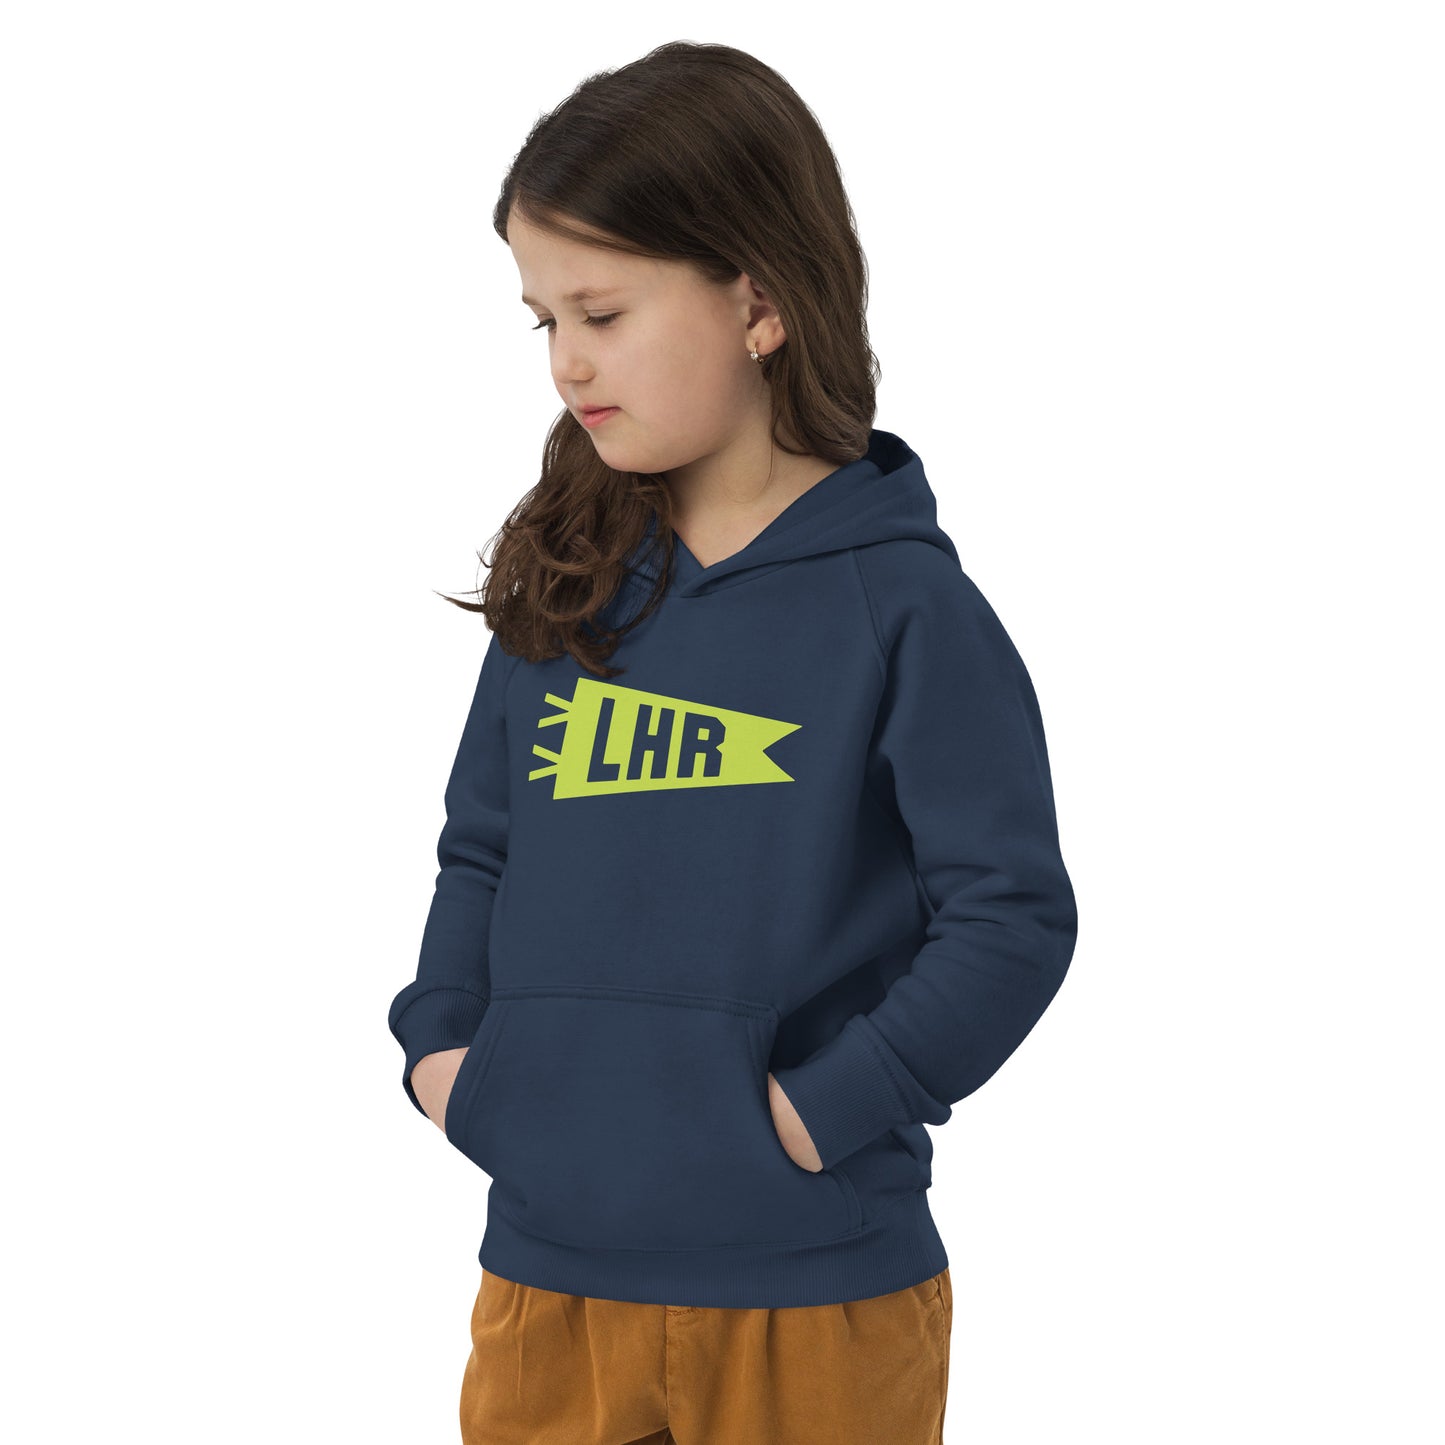 Kid's Sustainable Hoodie - Green Graphic • LHR London • YHM Designs - Image 05